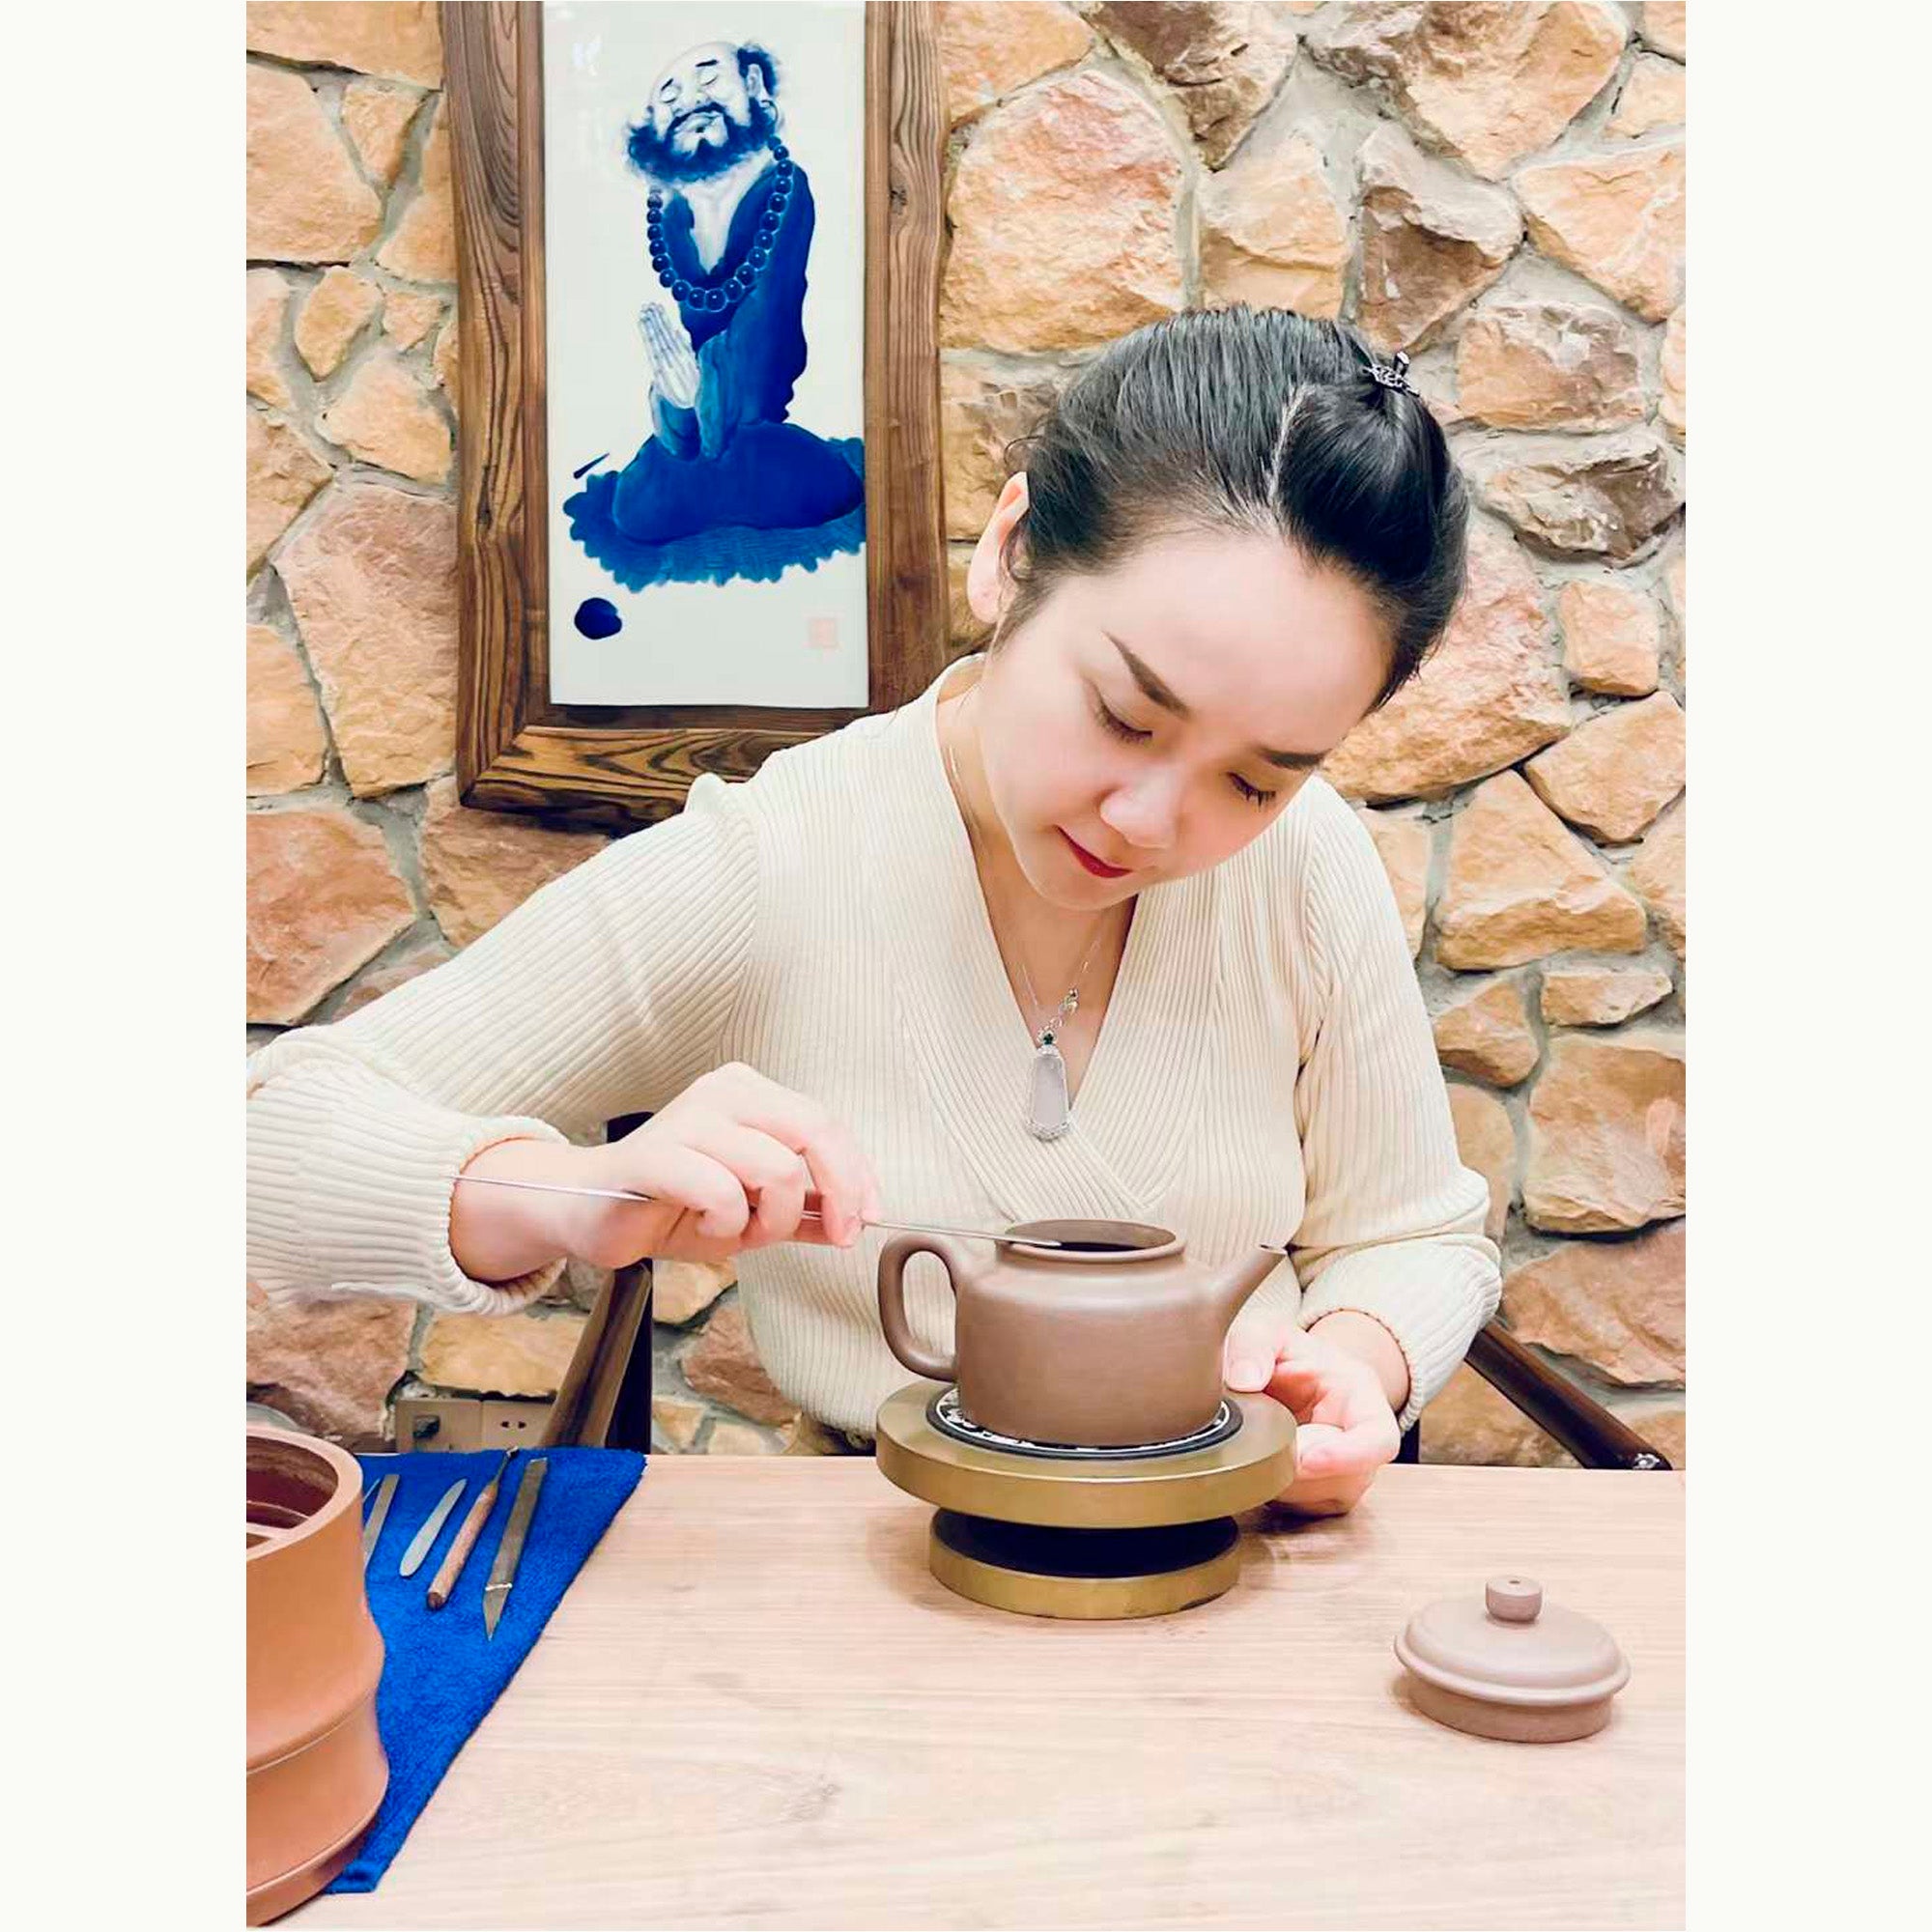 The Making of a Yixing Teapot - Live Demonstration